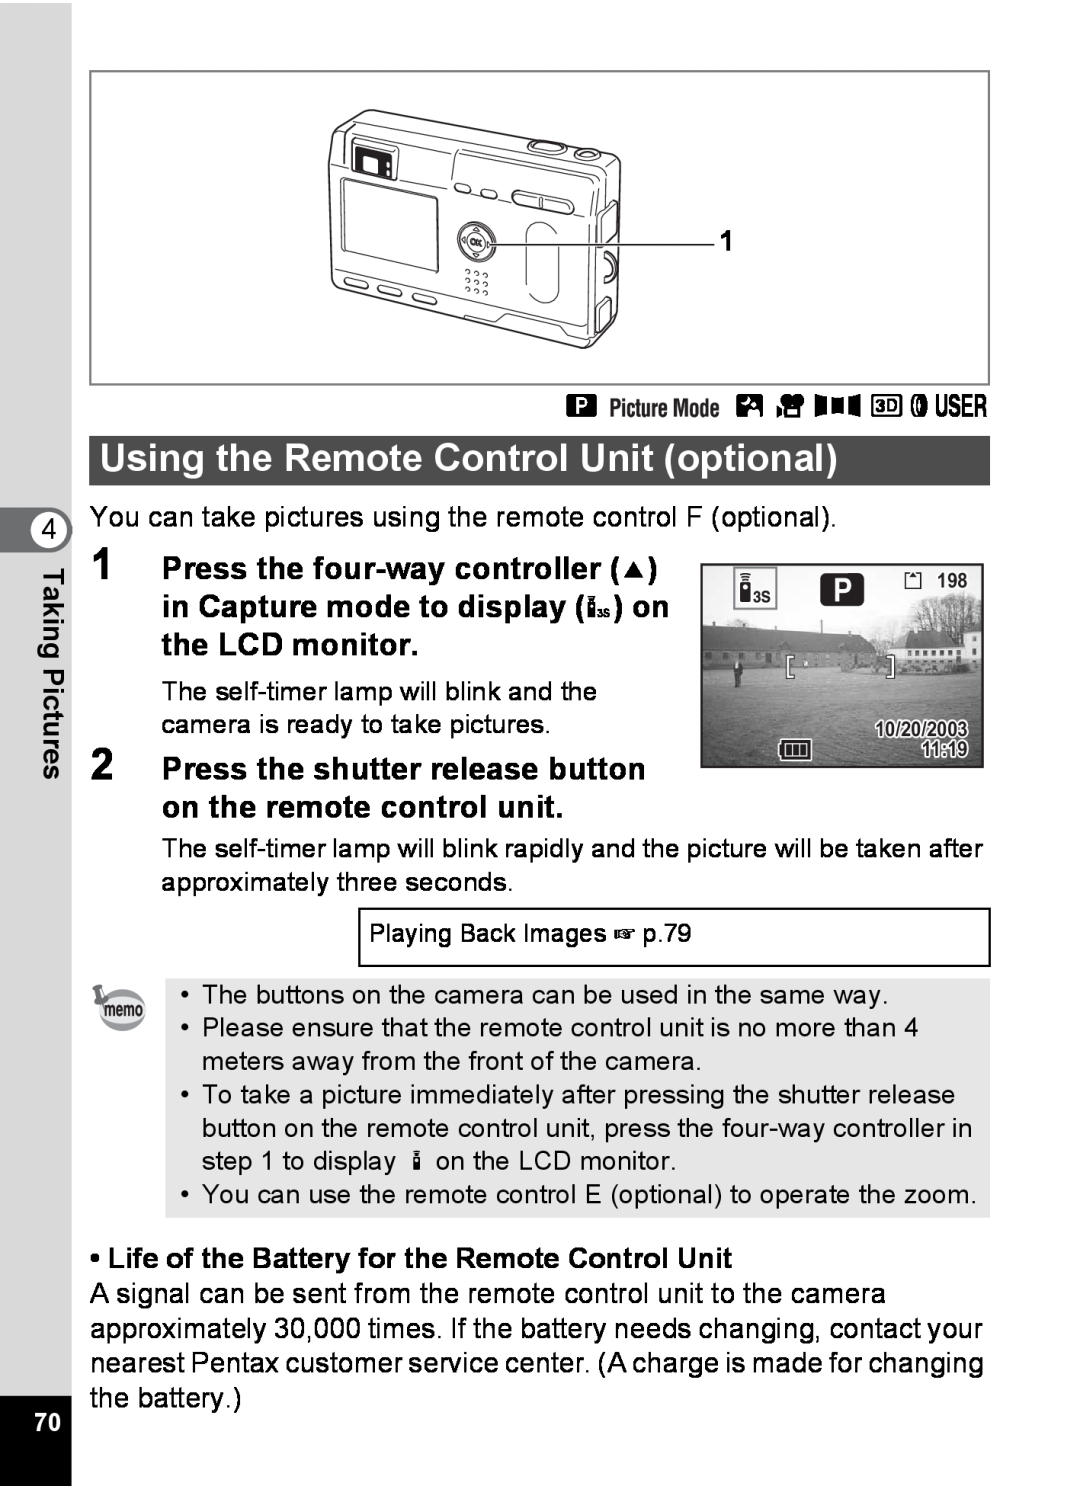 Pentax S4 Using the Remote Control Unit optional, Press the four-way controller, the LCD monitor, B C F Gde, 10/20/2003 